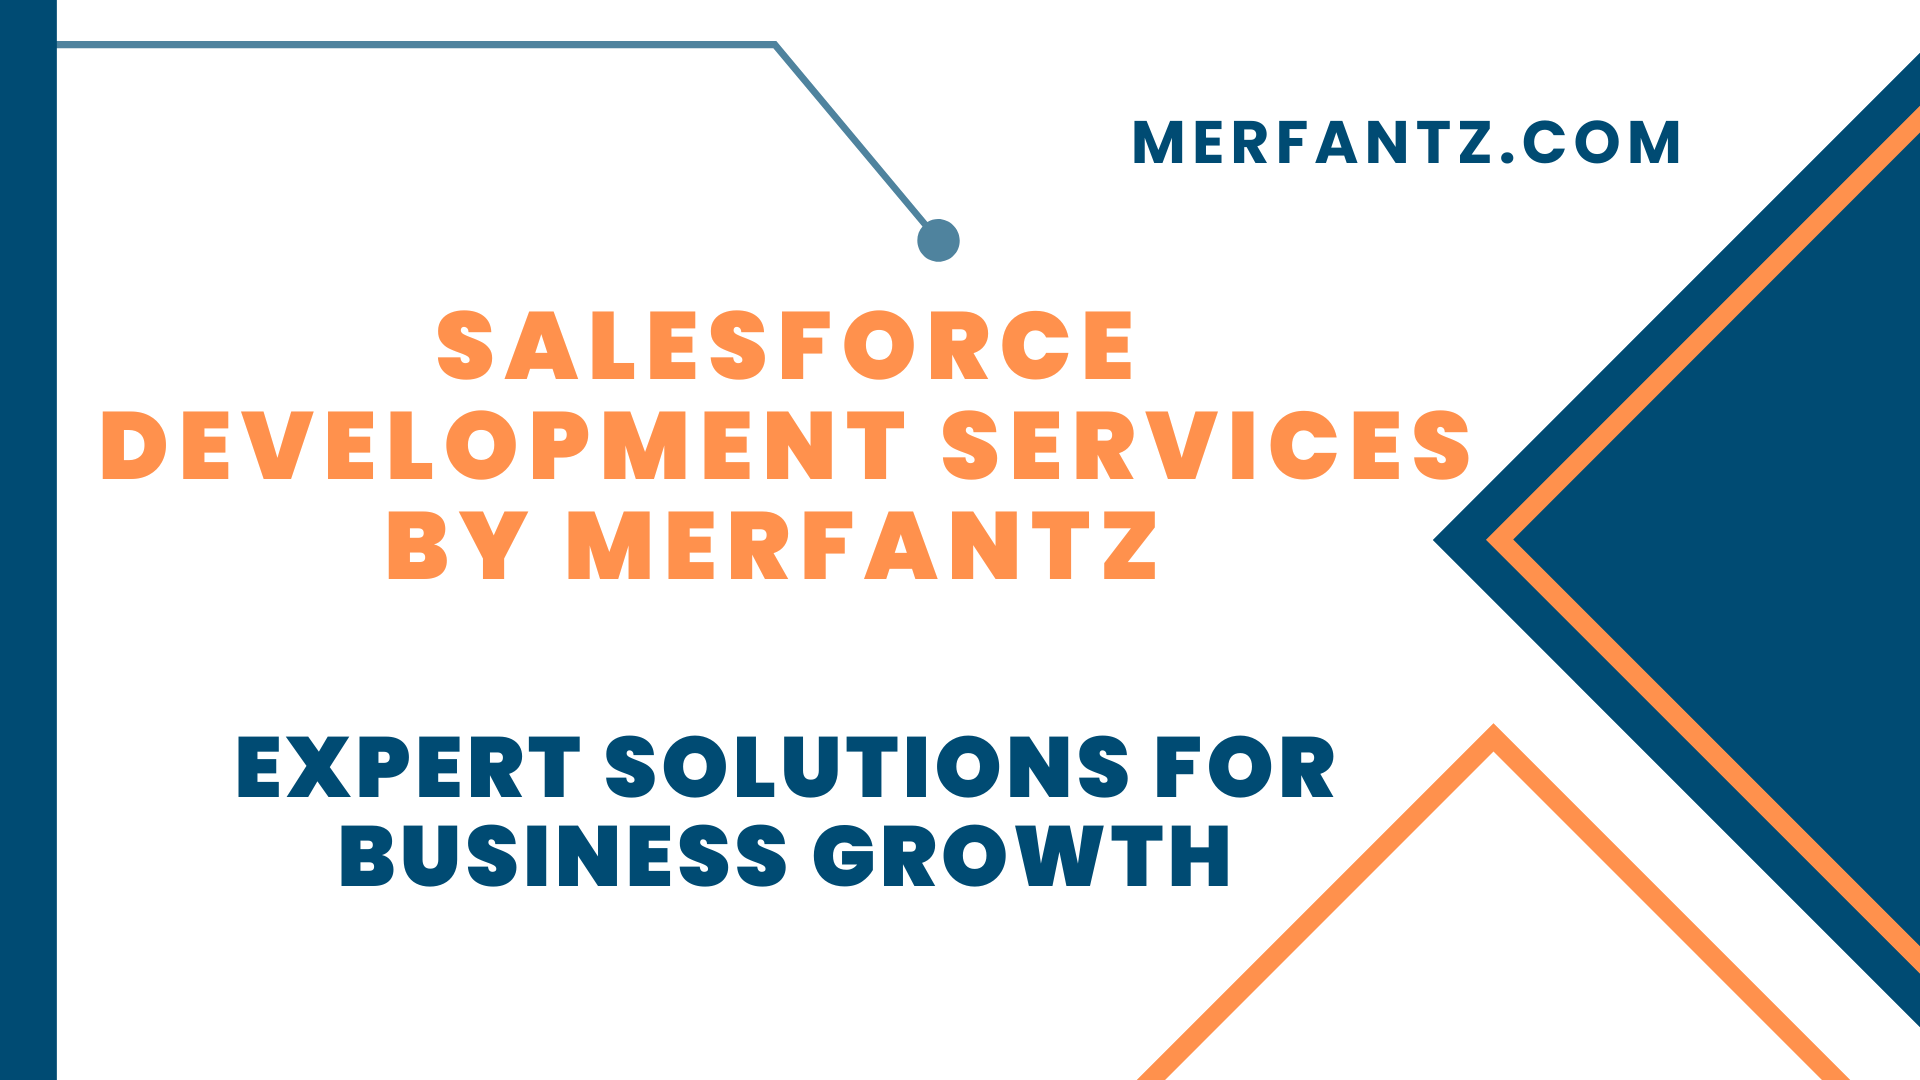 Salesforce Development Services by Merfantz Expert Solutions for Business Growth